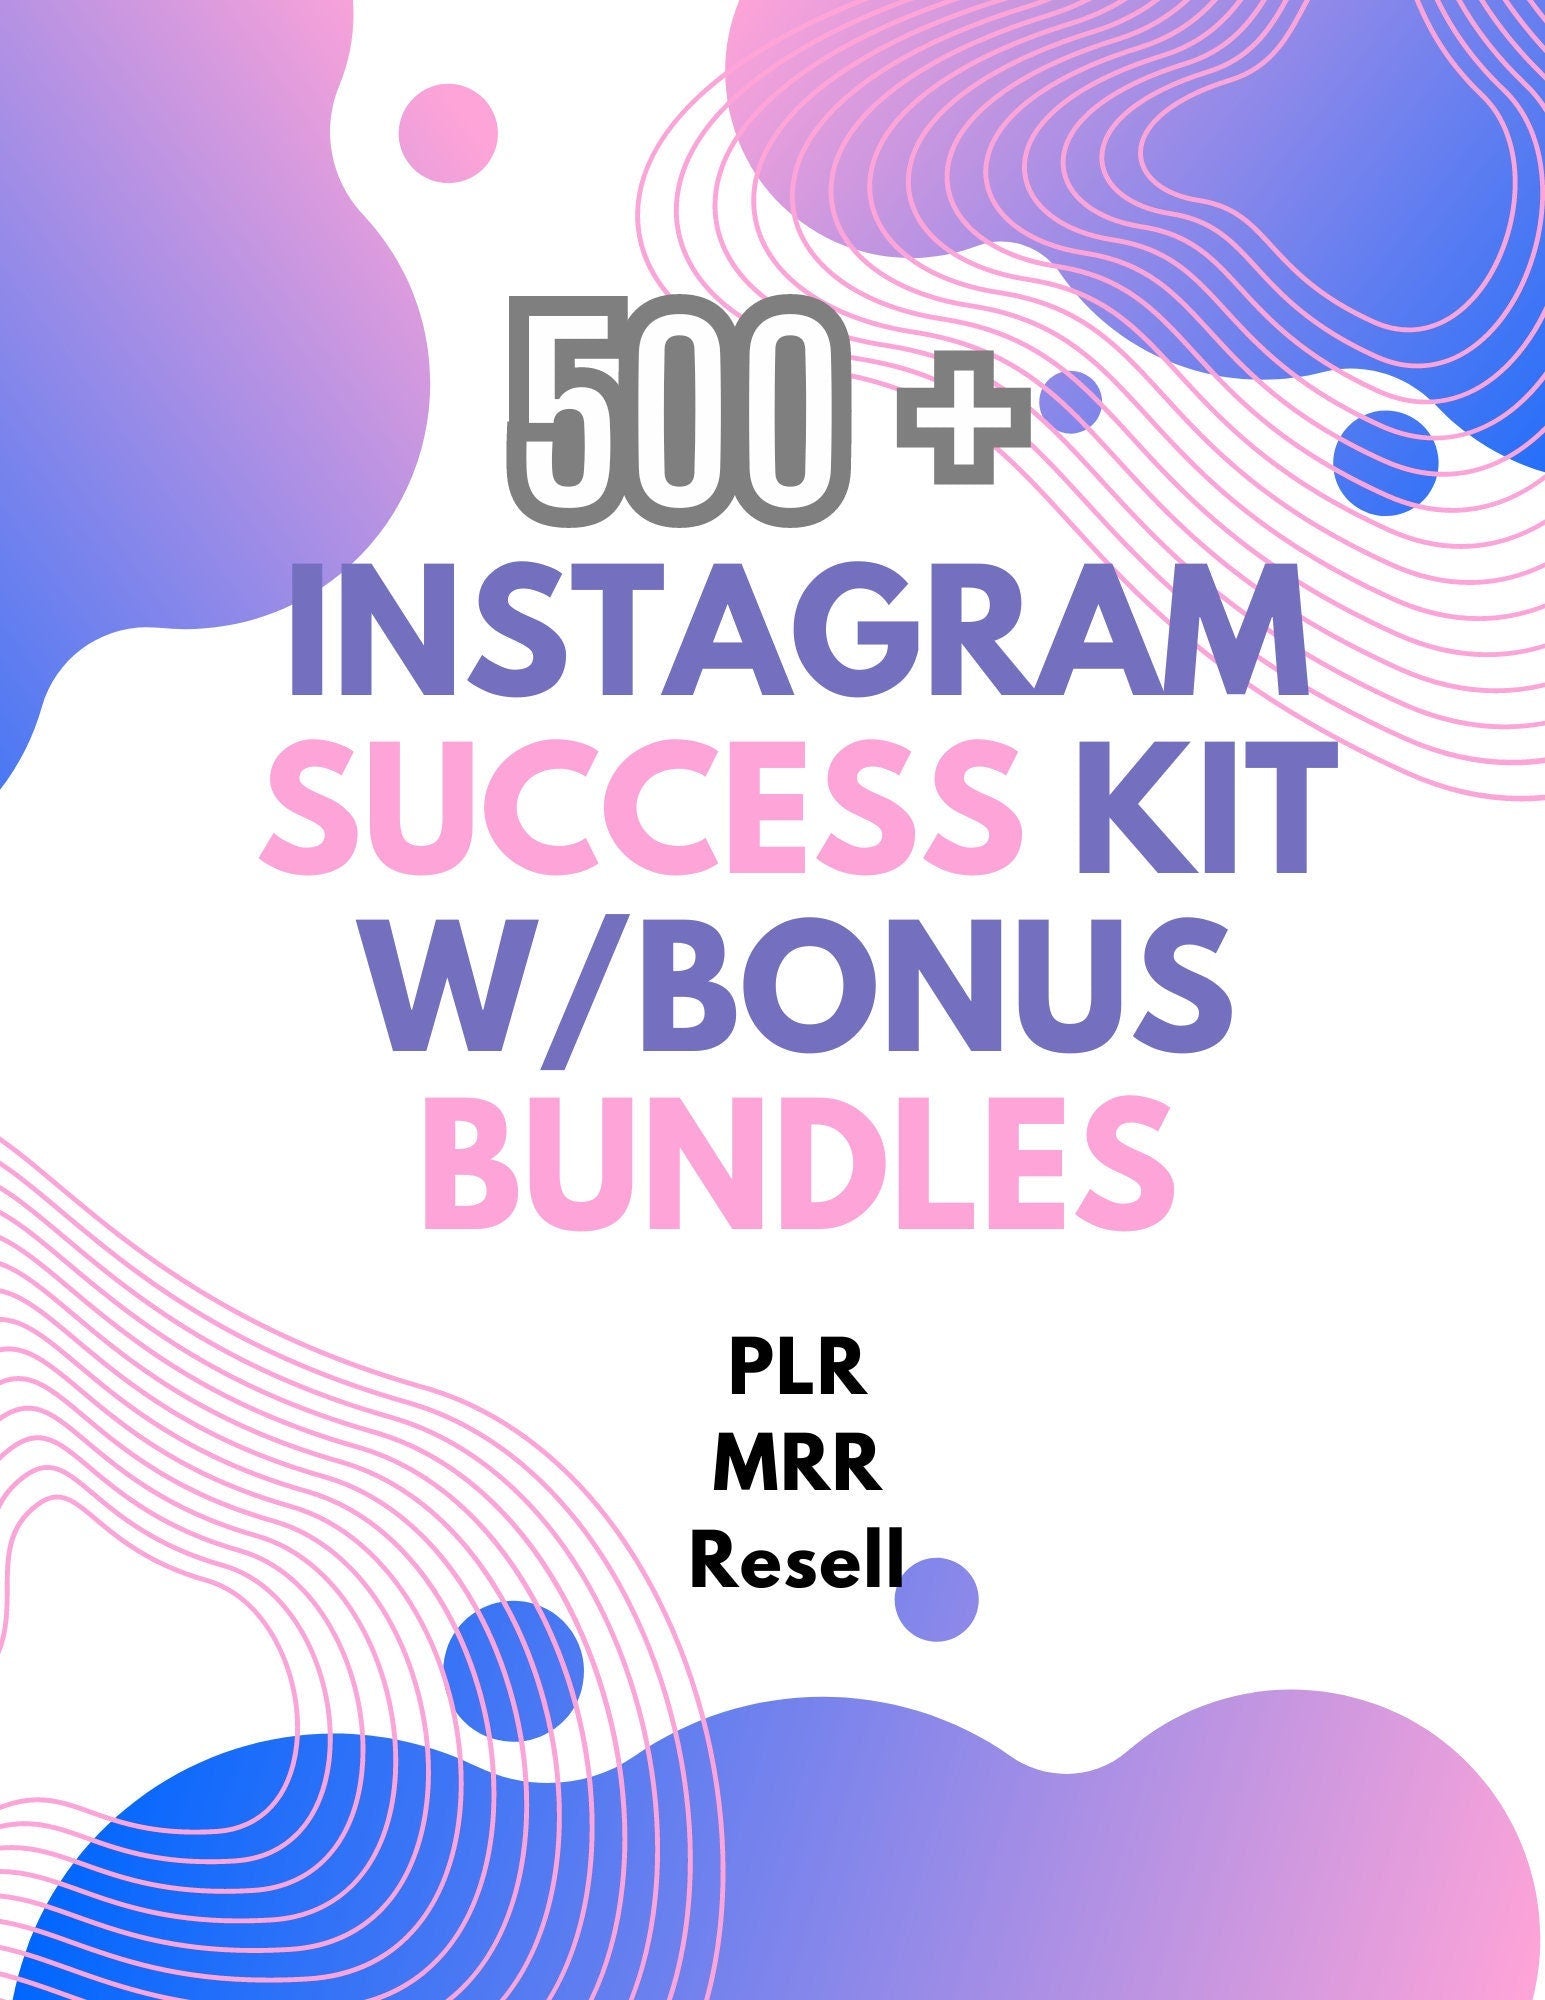 Ultimate Instagram Success Bundle Faceless E-Book, PLR Resell Rights, Over 500 Digital Products w PLR & Resell Rights, Edit In Canva Bonuses